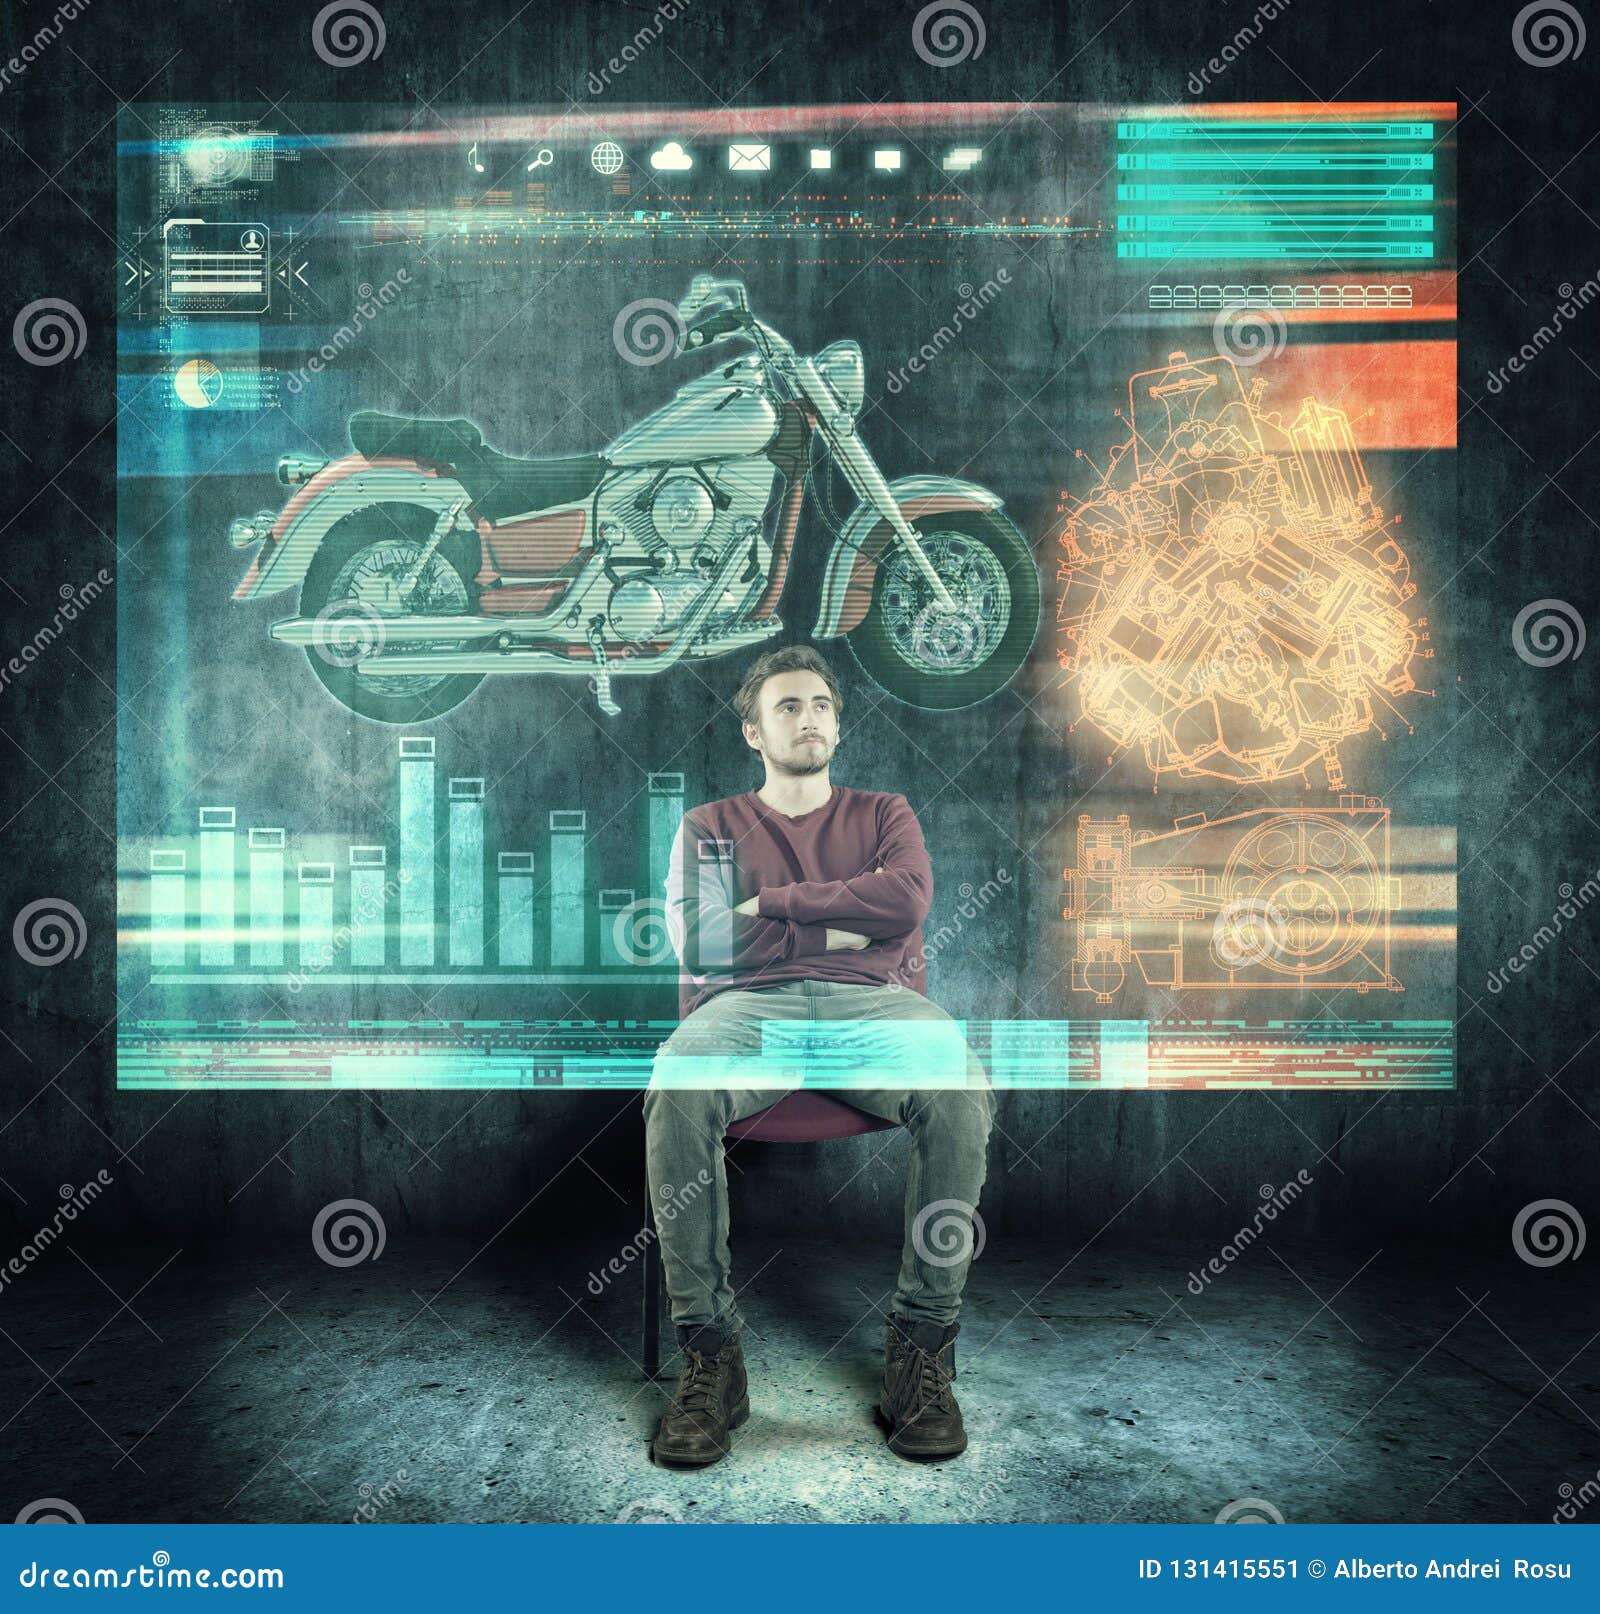 man do research about motocycle on digital screen holograma at home.